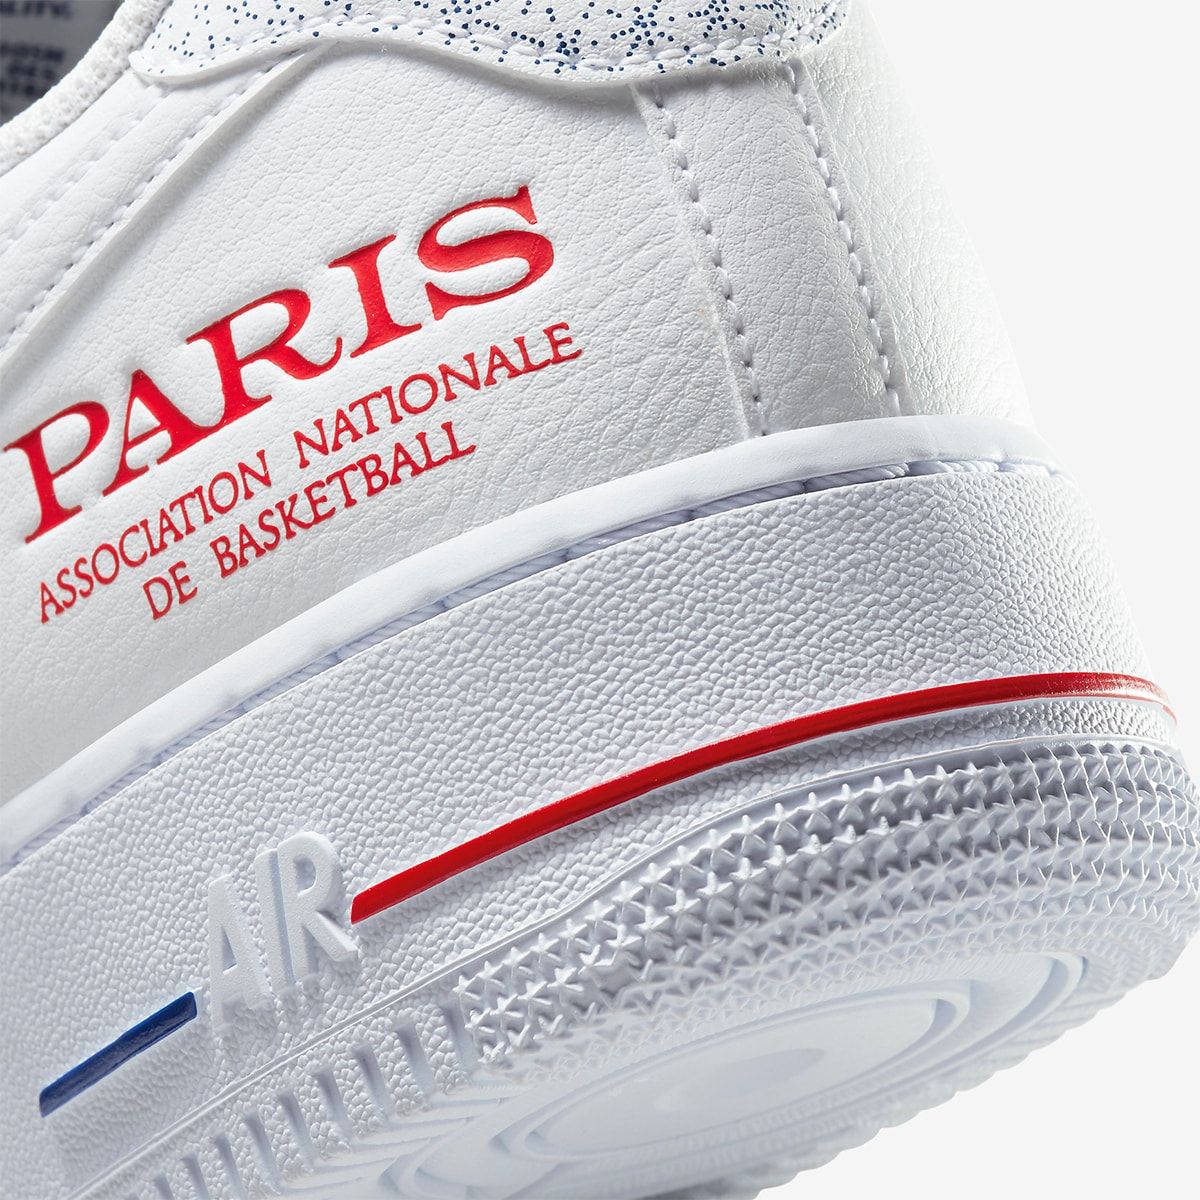 Nike Commemorate Upcoming NBA Game in Paris With Special-Edition